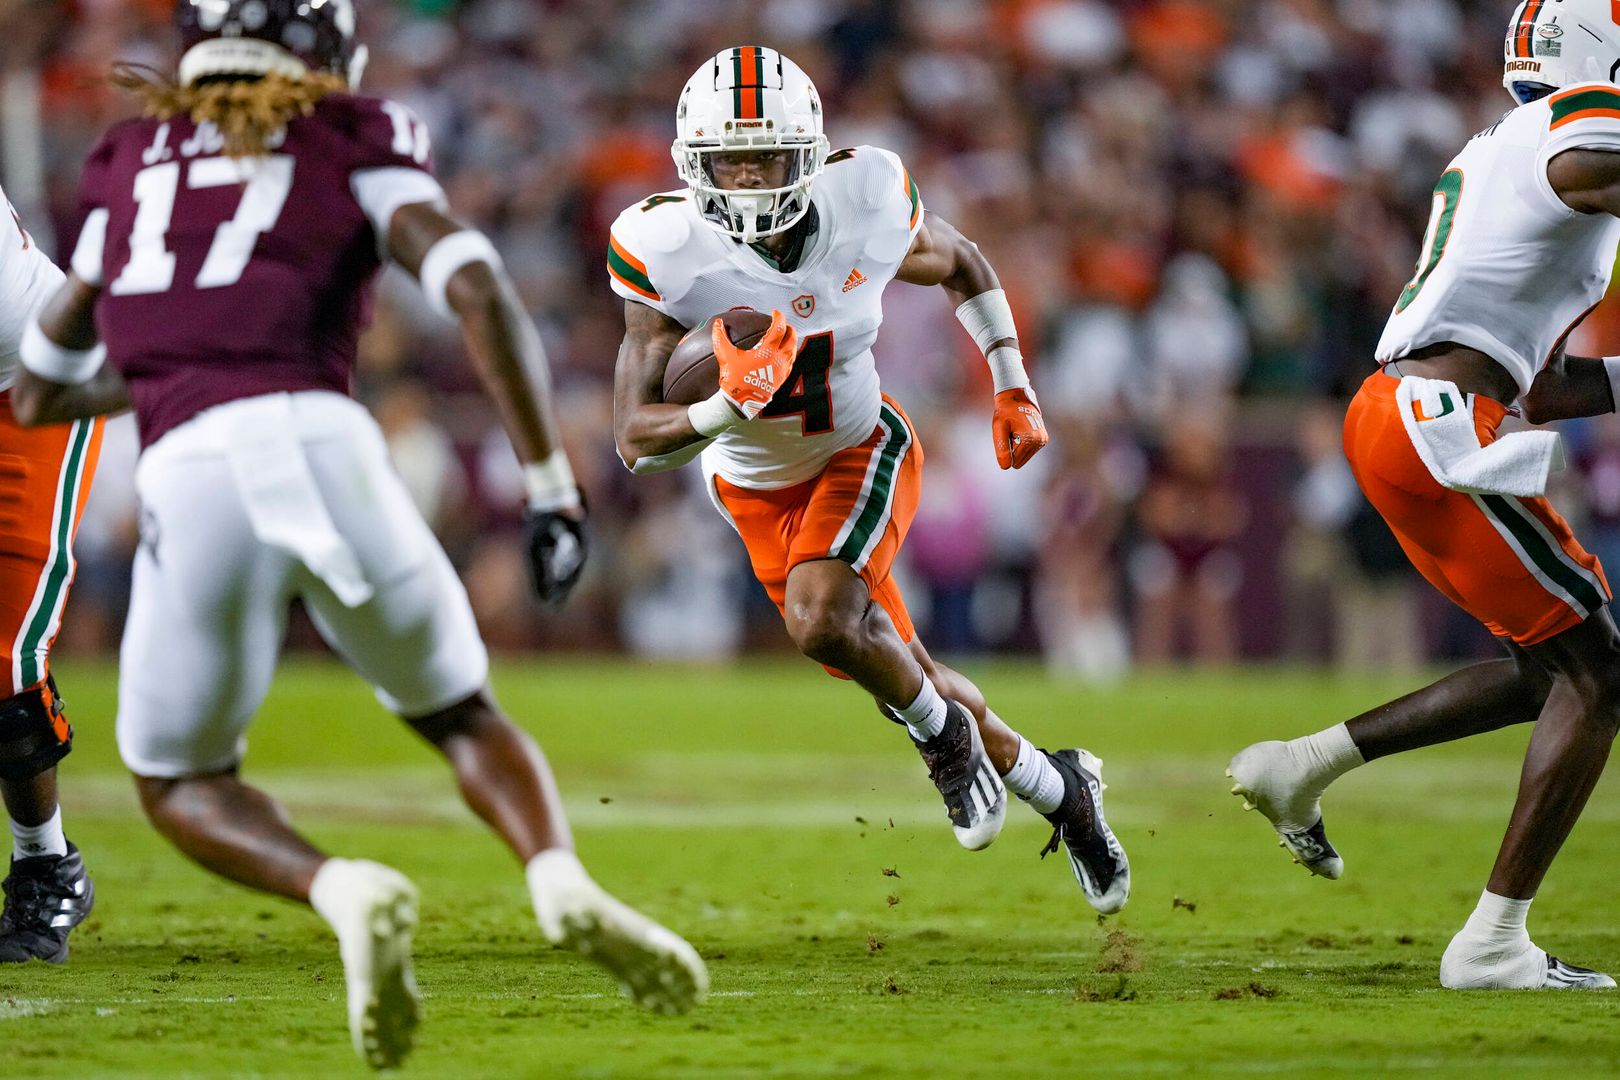 Photo Gallery: Canes at Texas A&M 09.17.22